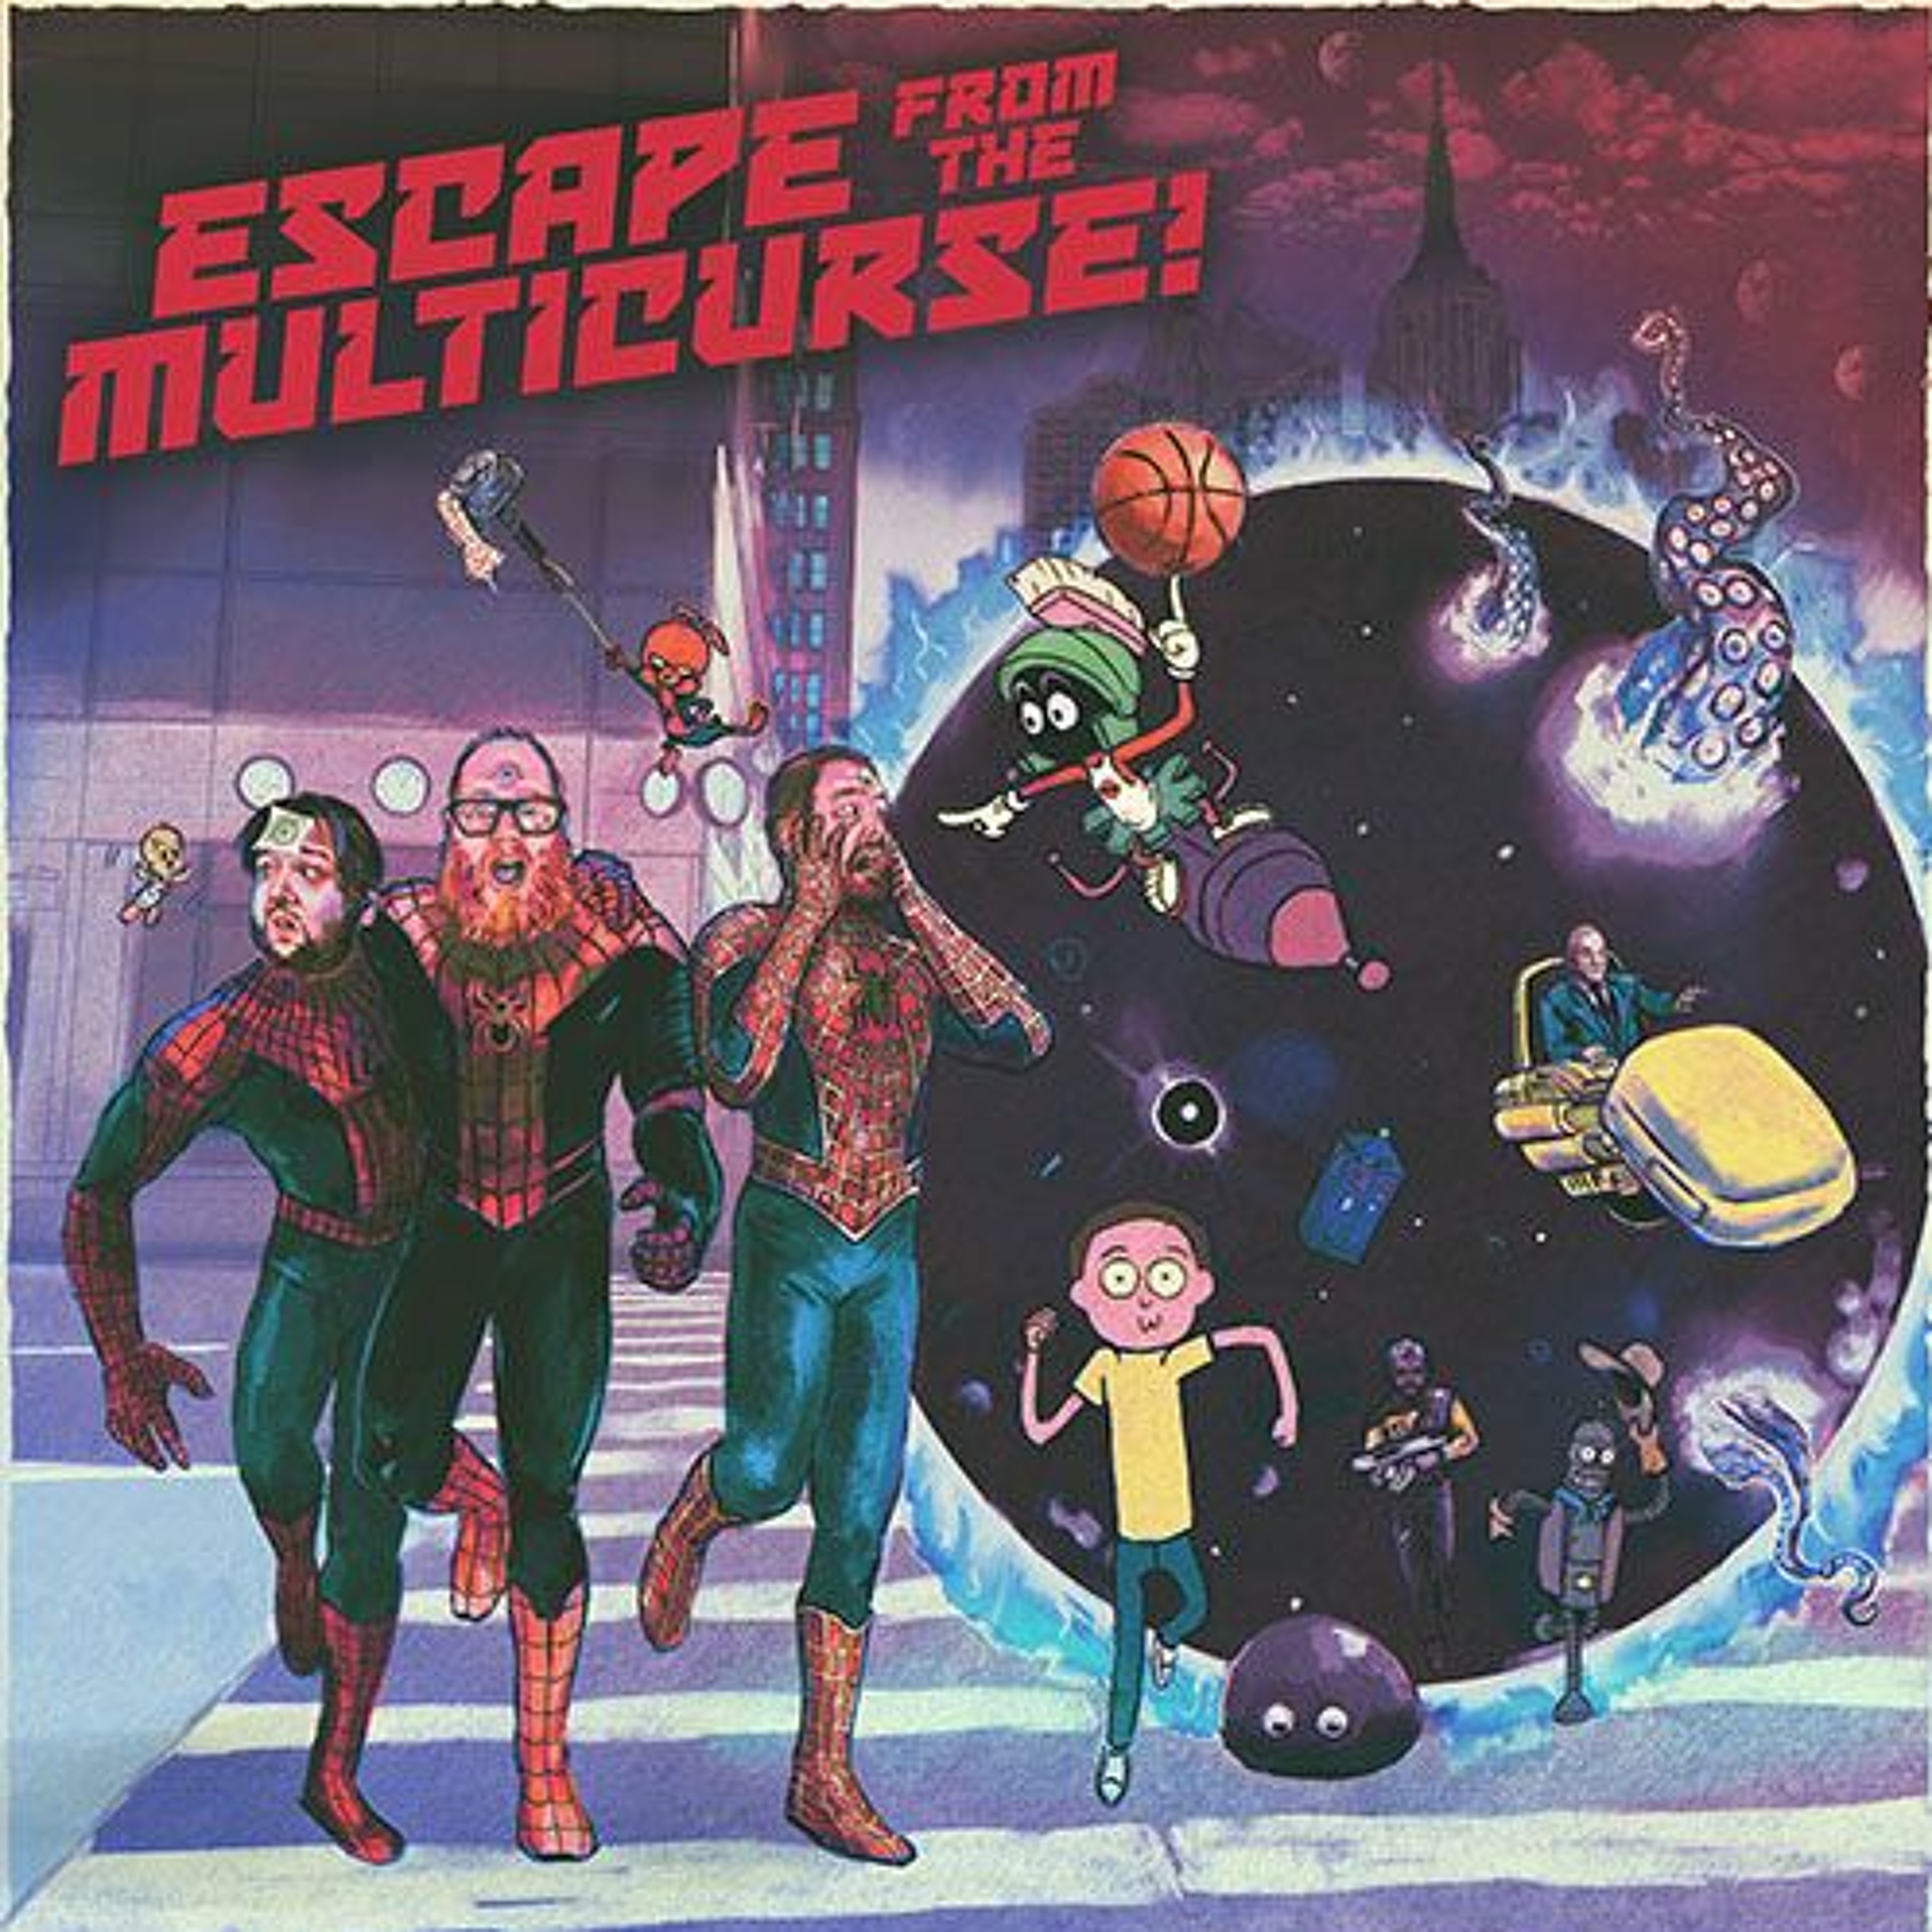 501. Escape from the Multicurse: Dr. Strange in the Multiverse of Madness